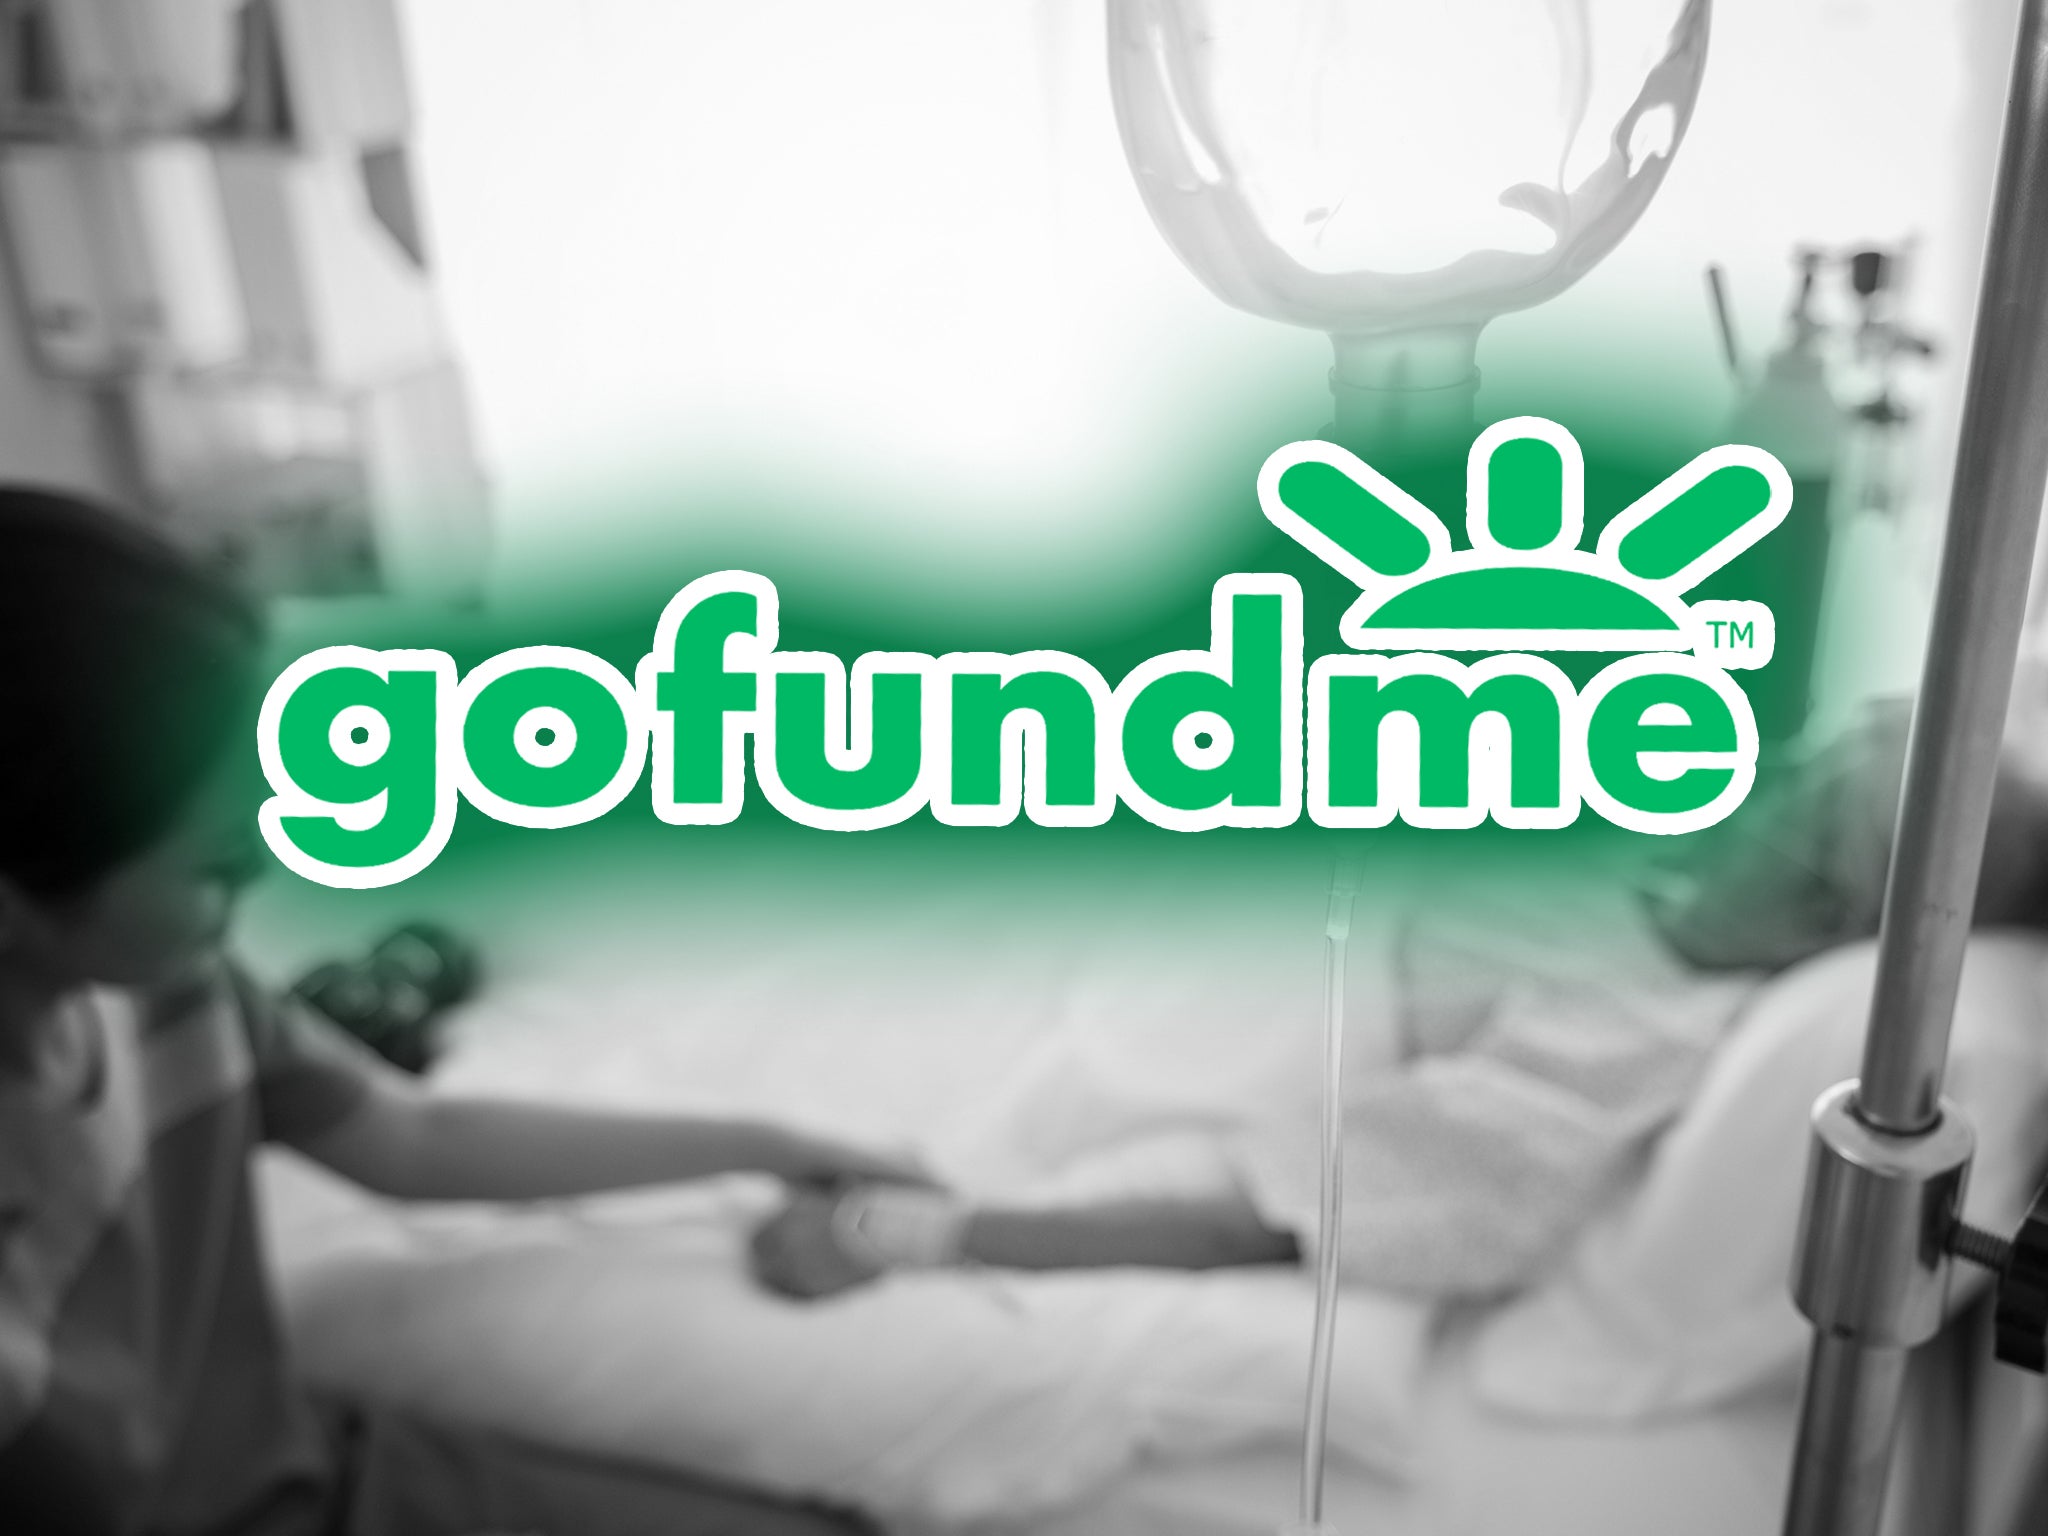 Experts say patients shouldn’t rely on GoFundMe for medical expenses, and yet thousands of Americans do anyway